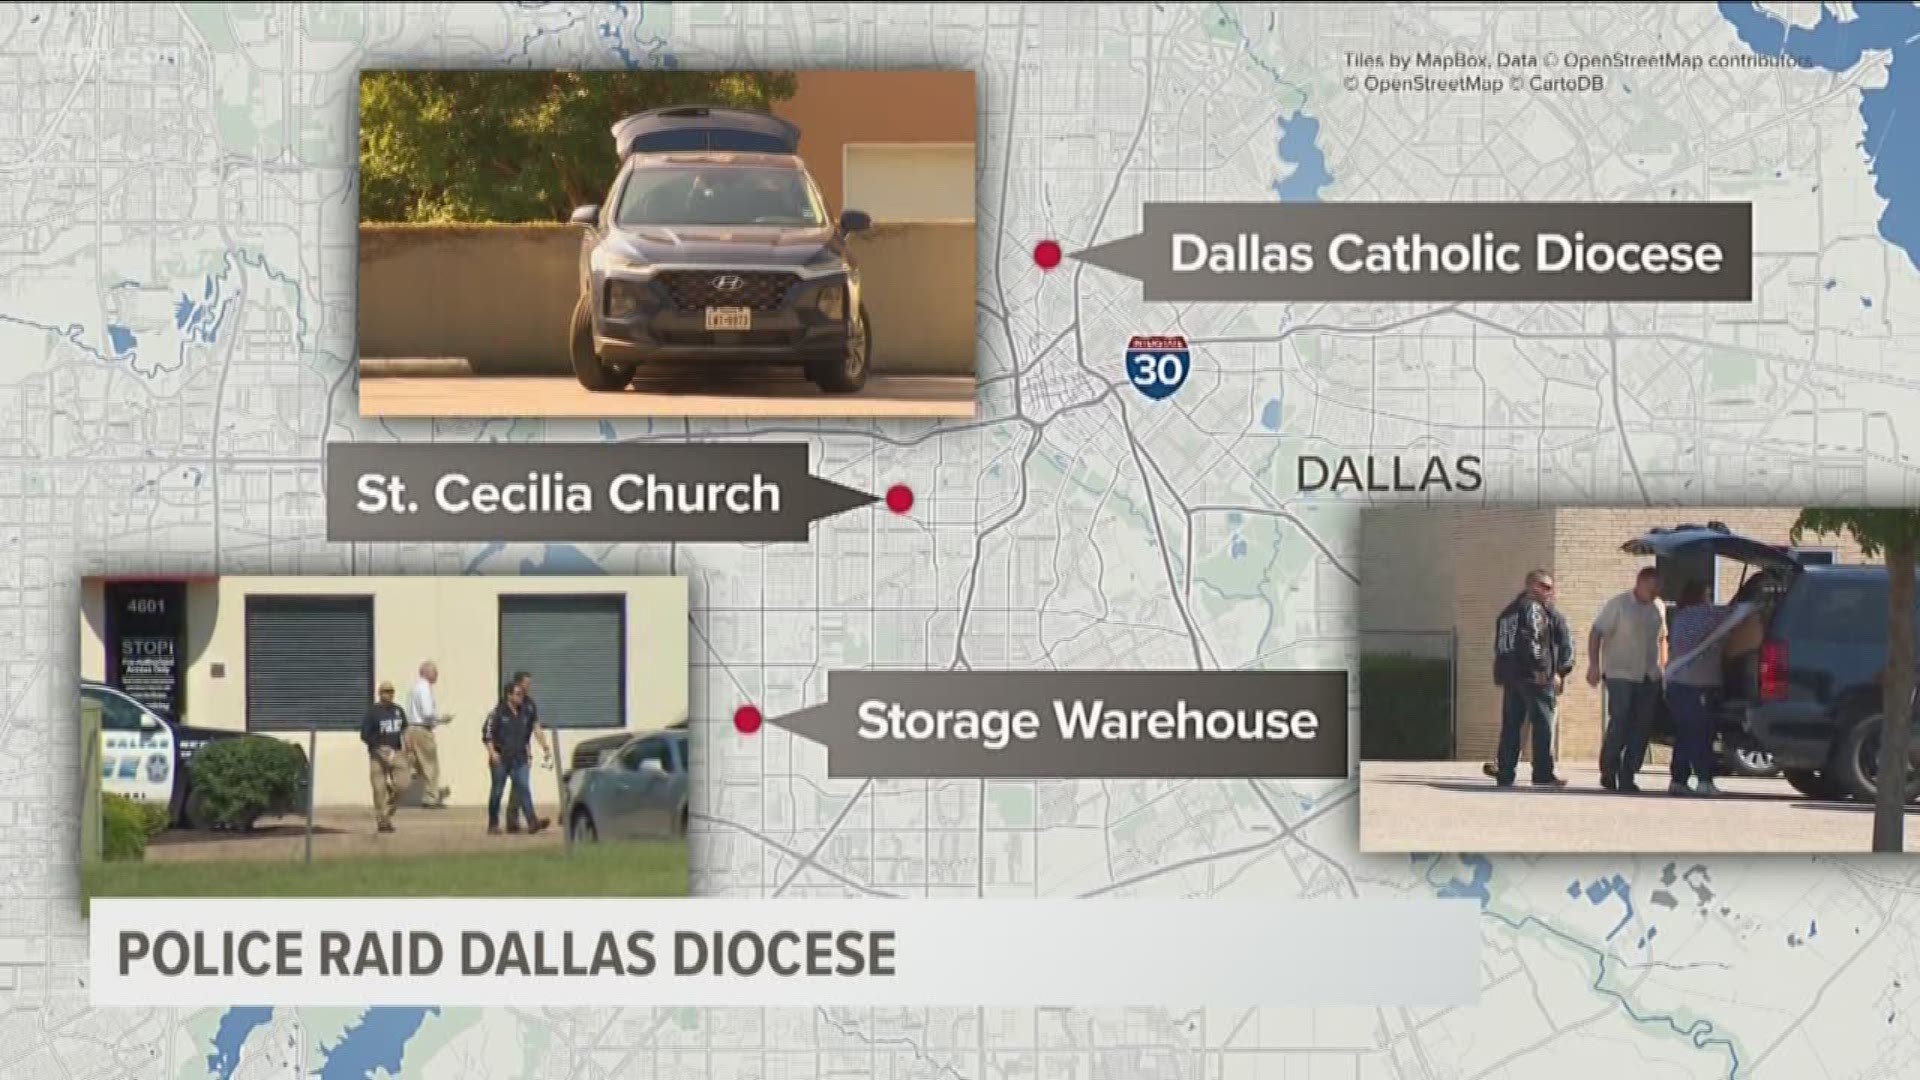 Detectives are accusing the Church of stonewalling their investigation.